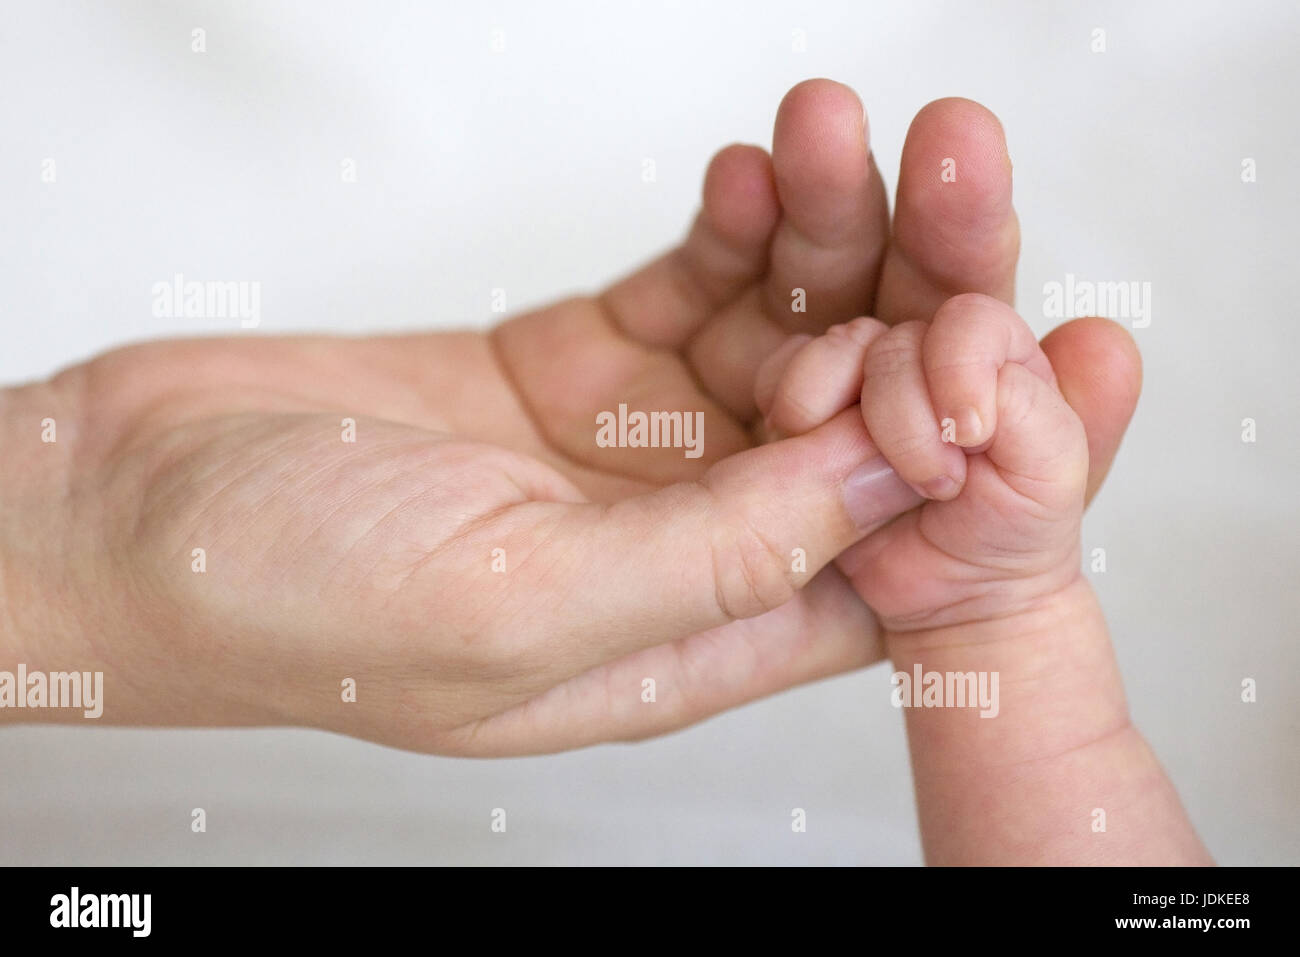 'Mother; child; woman; girls; 3; weeks; old; the old; young; the young; baby; hand; hands; clasp; clasped, hand in hand; model released; person; peopl Stock Photo